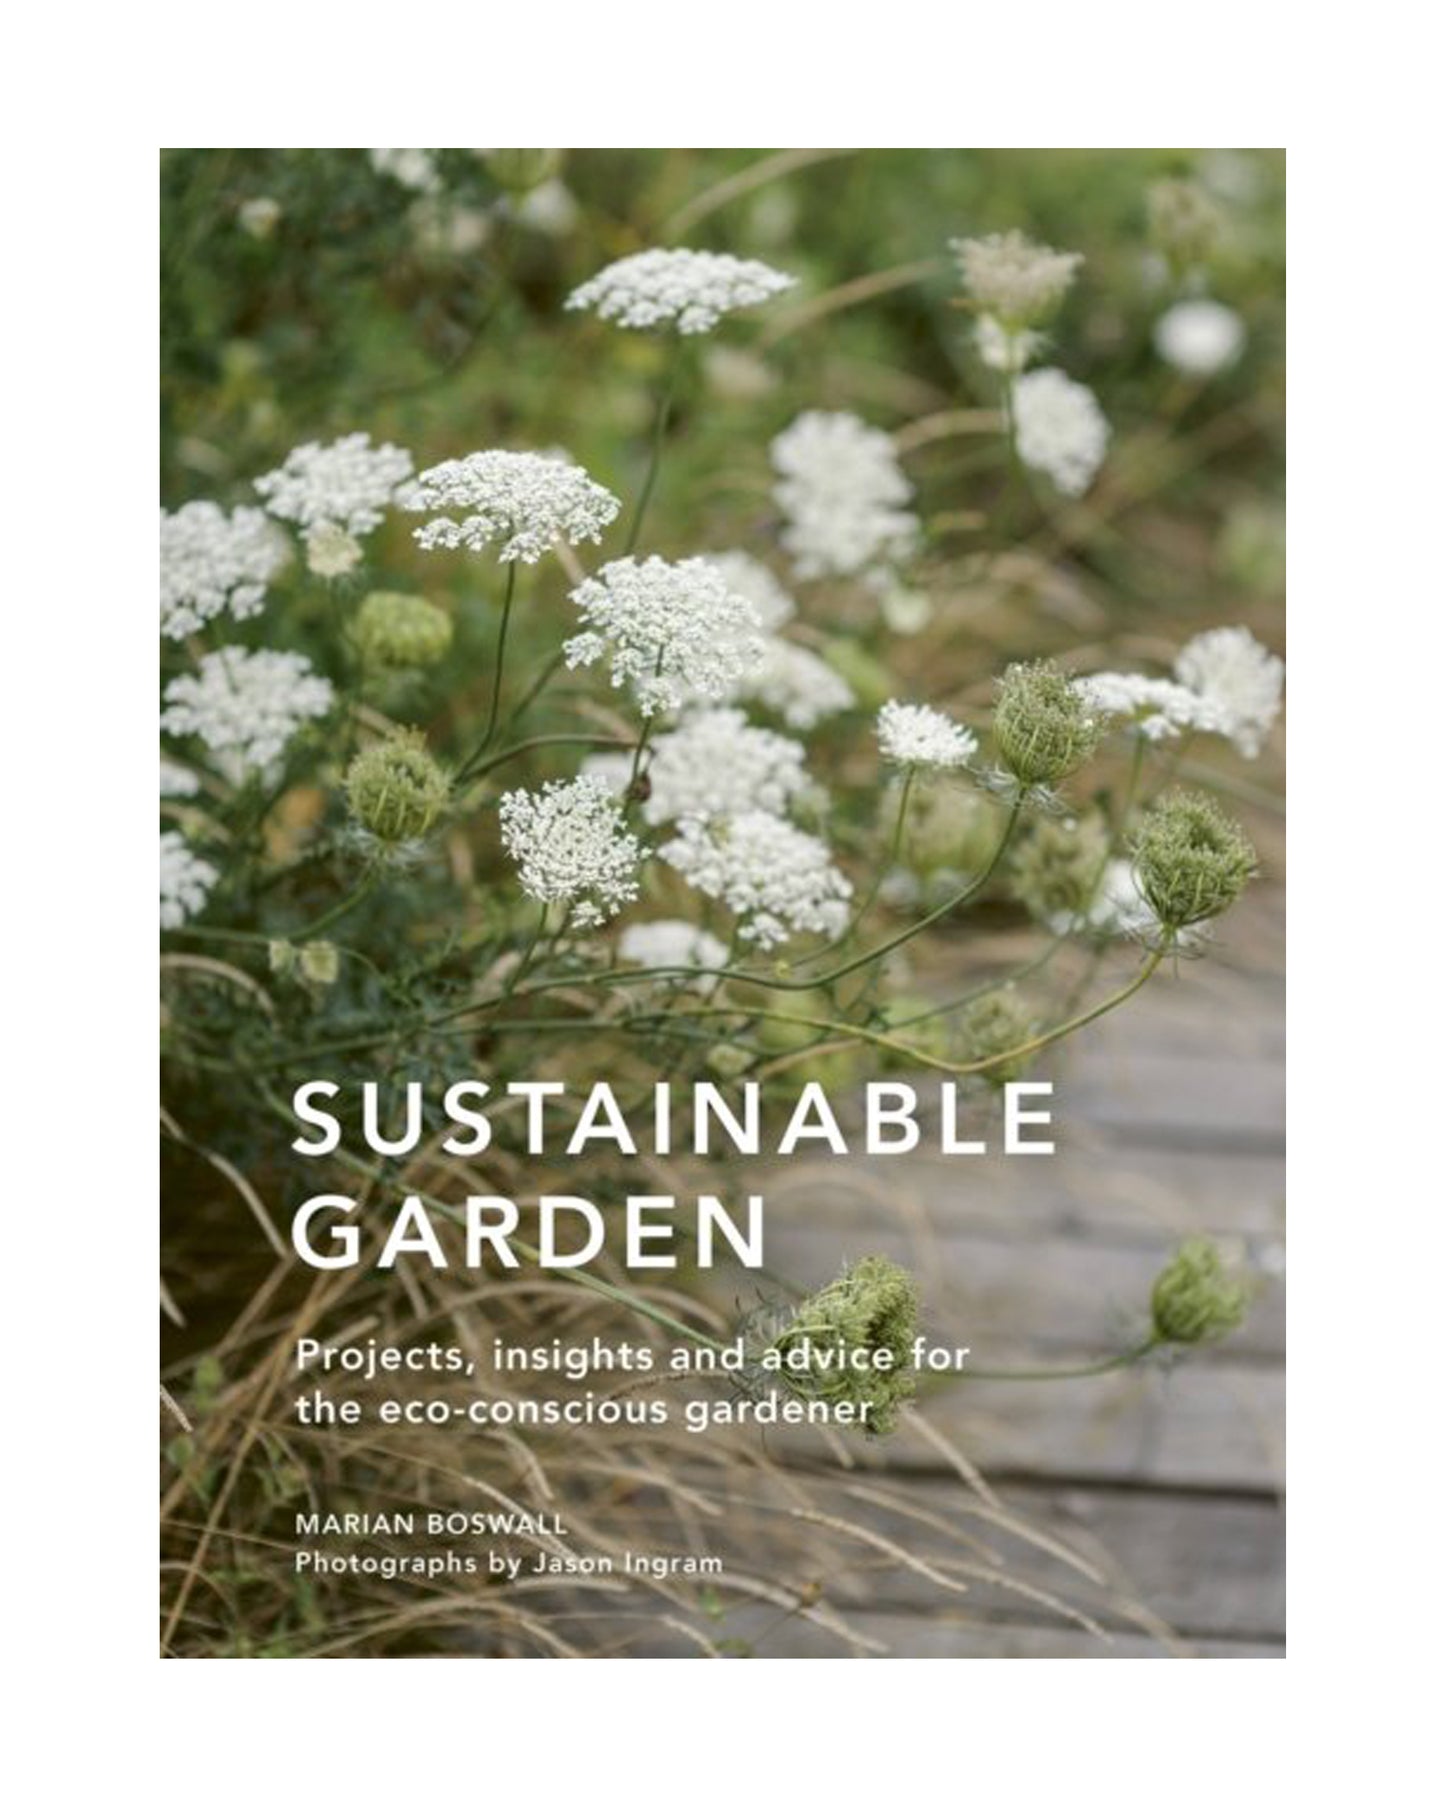 Sustainable Garden: Projects, insights and advice for the eco-conscious gardener